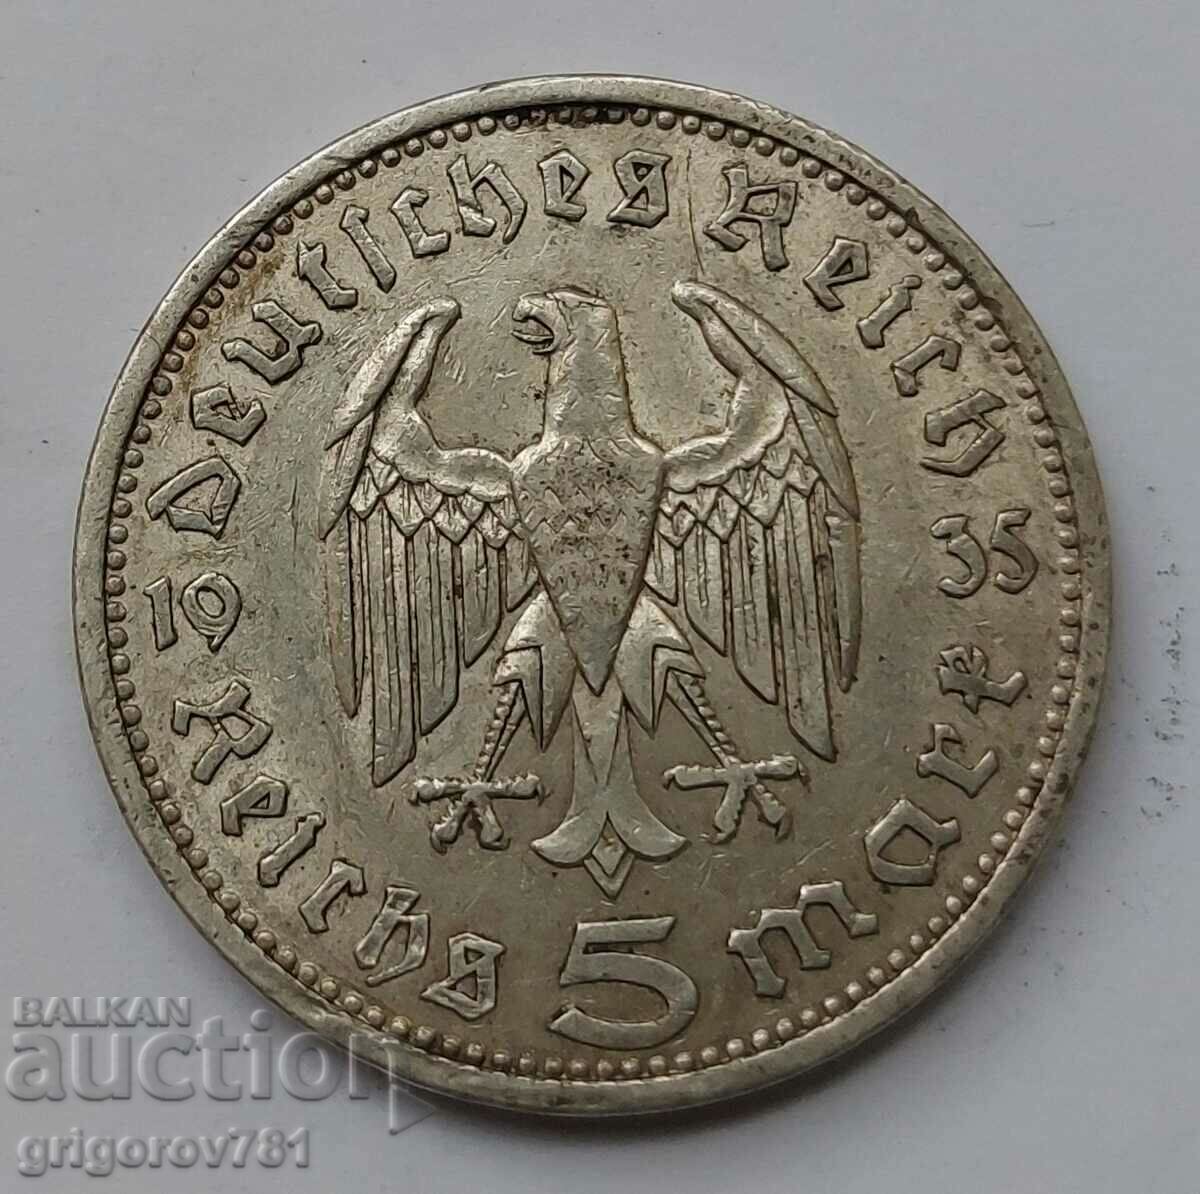 5 Mark Silver Germany 1935 A III Reich Silver Coin #90